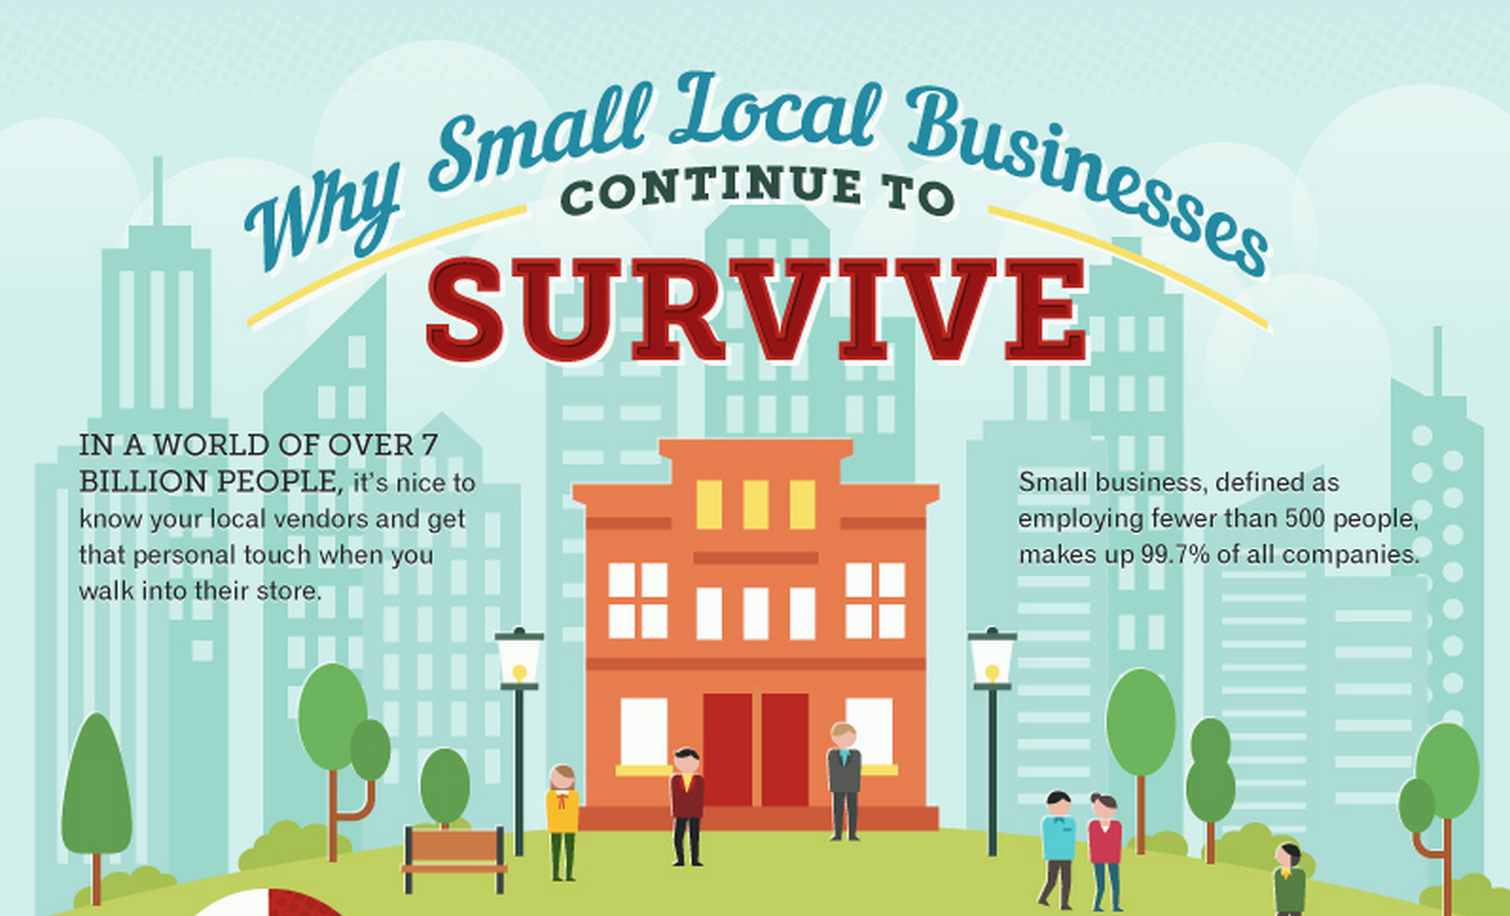 Why Small Local Businesses Continue To Survive And Thrive Infographic